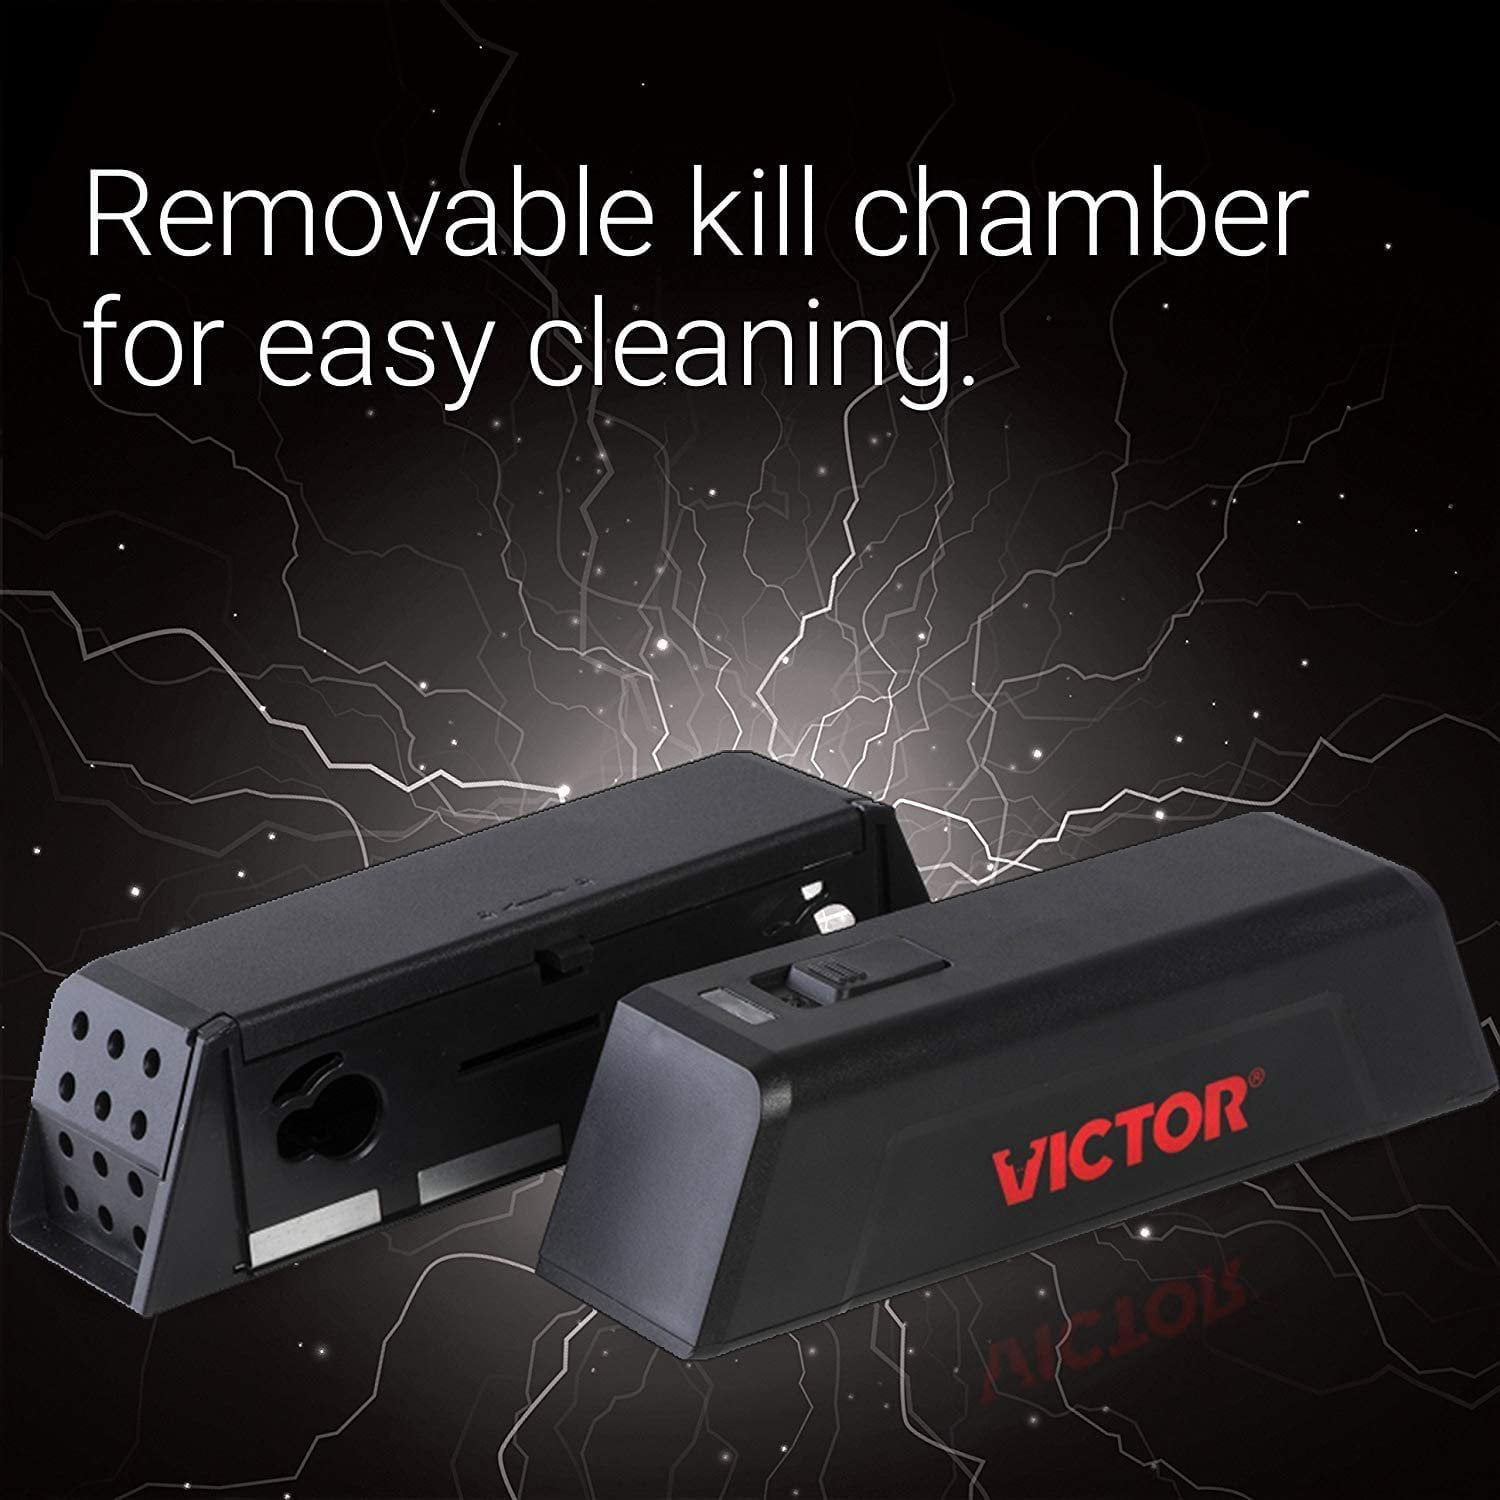 Victor Electronic Mouse Trap- No touch, No See disposal - M2524 